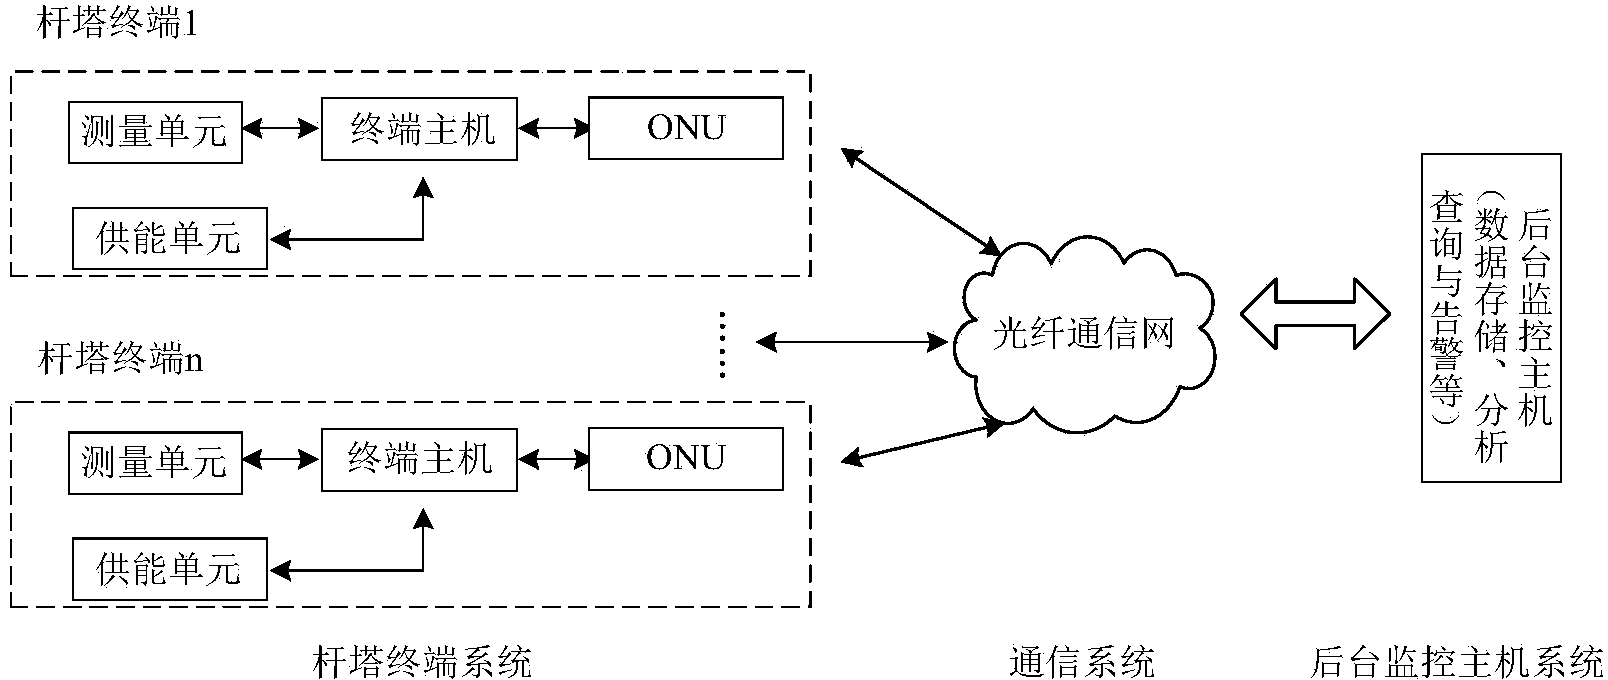 On-line touring system of power transmission line